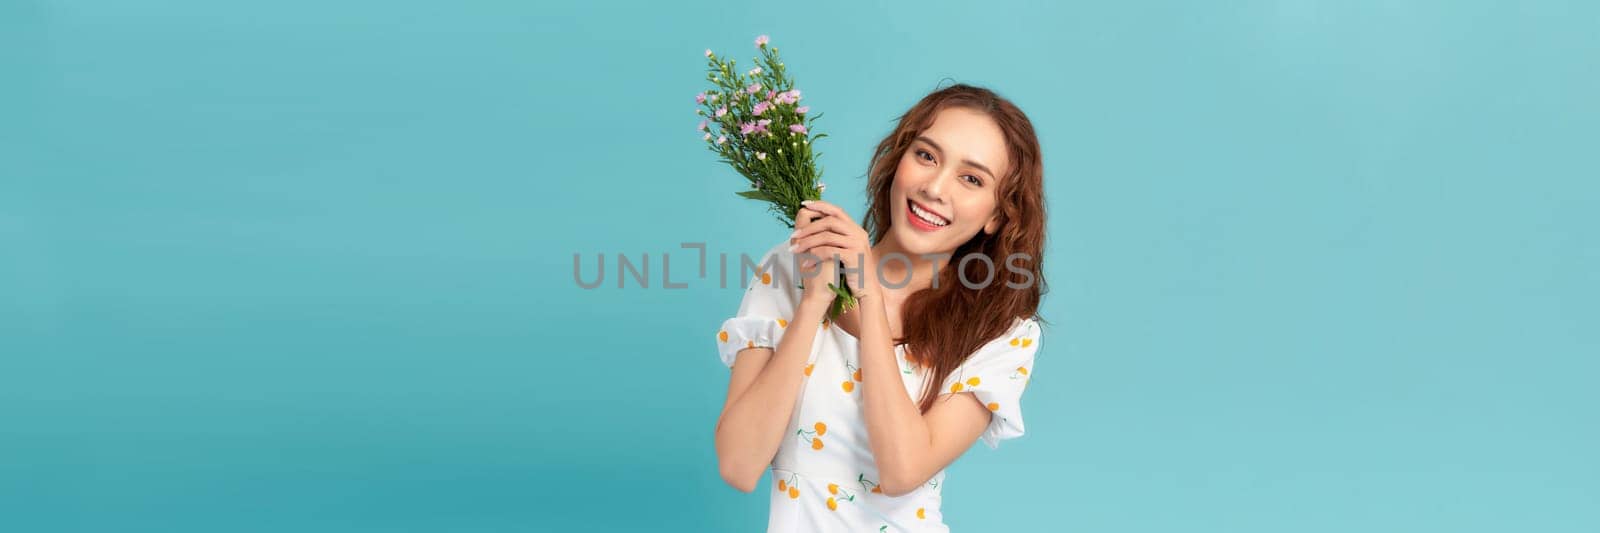 Beautiful cheerful young girl wearing summer dress, holding bouquet of wildflowers